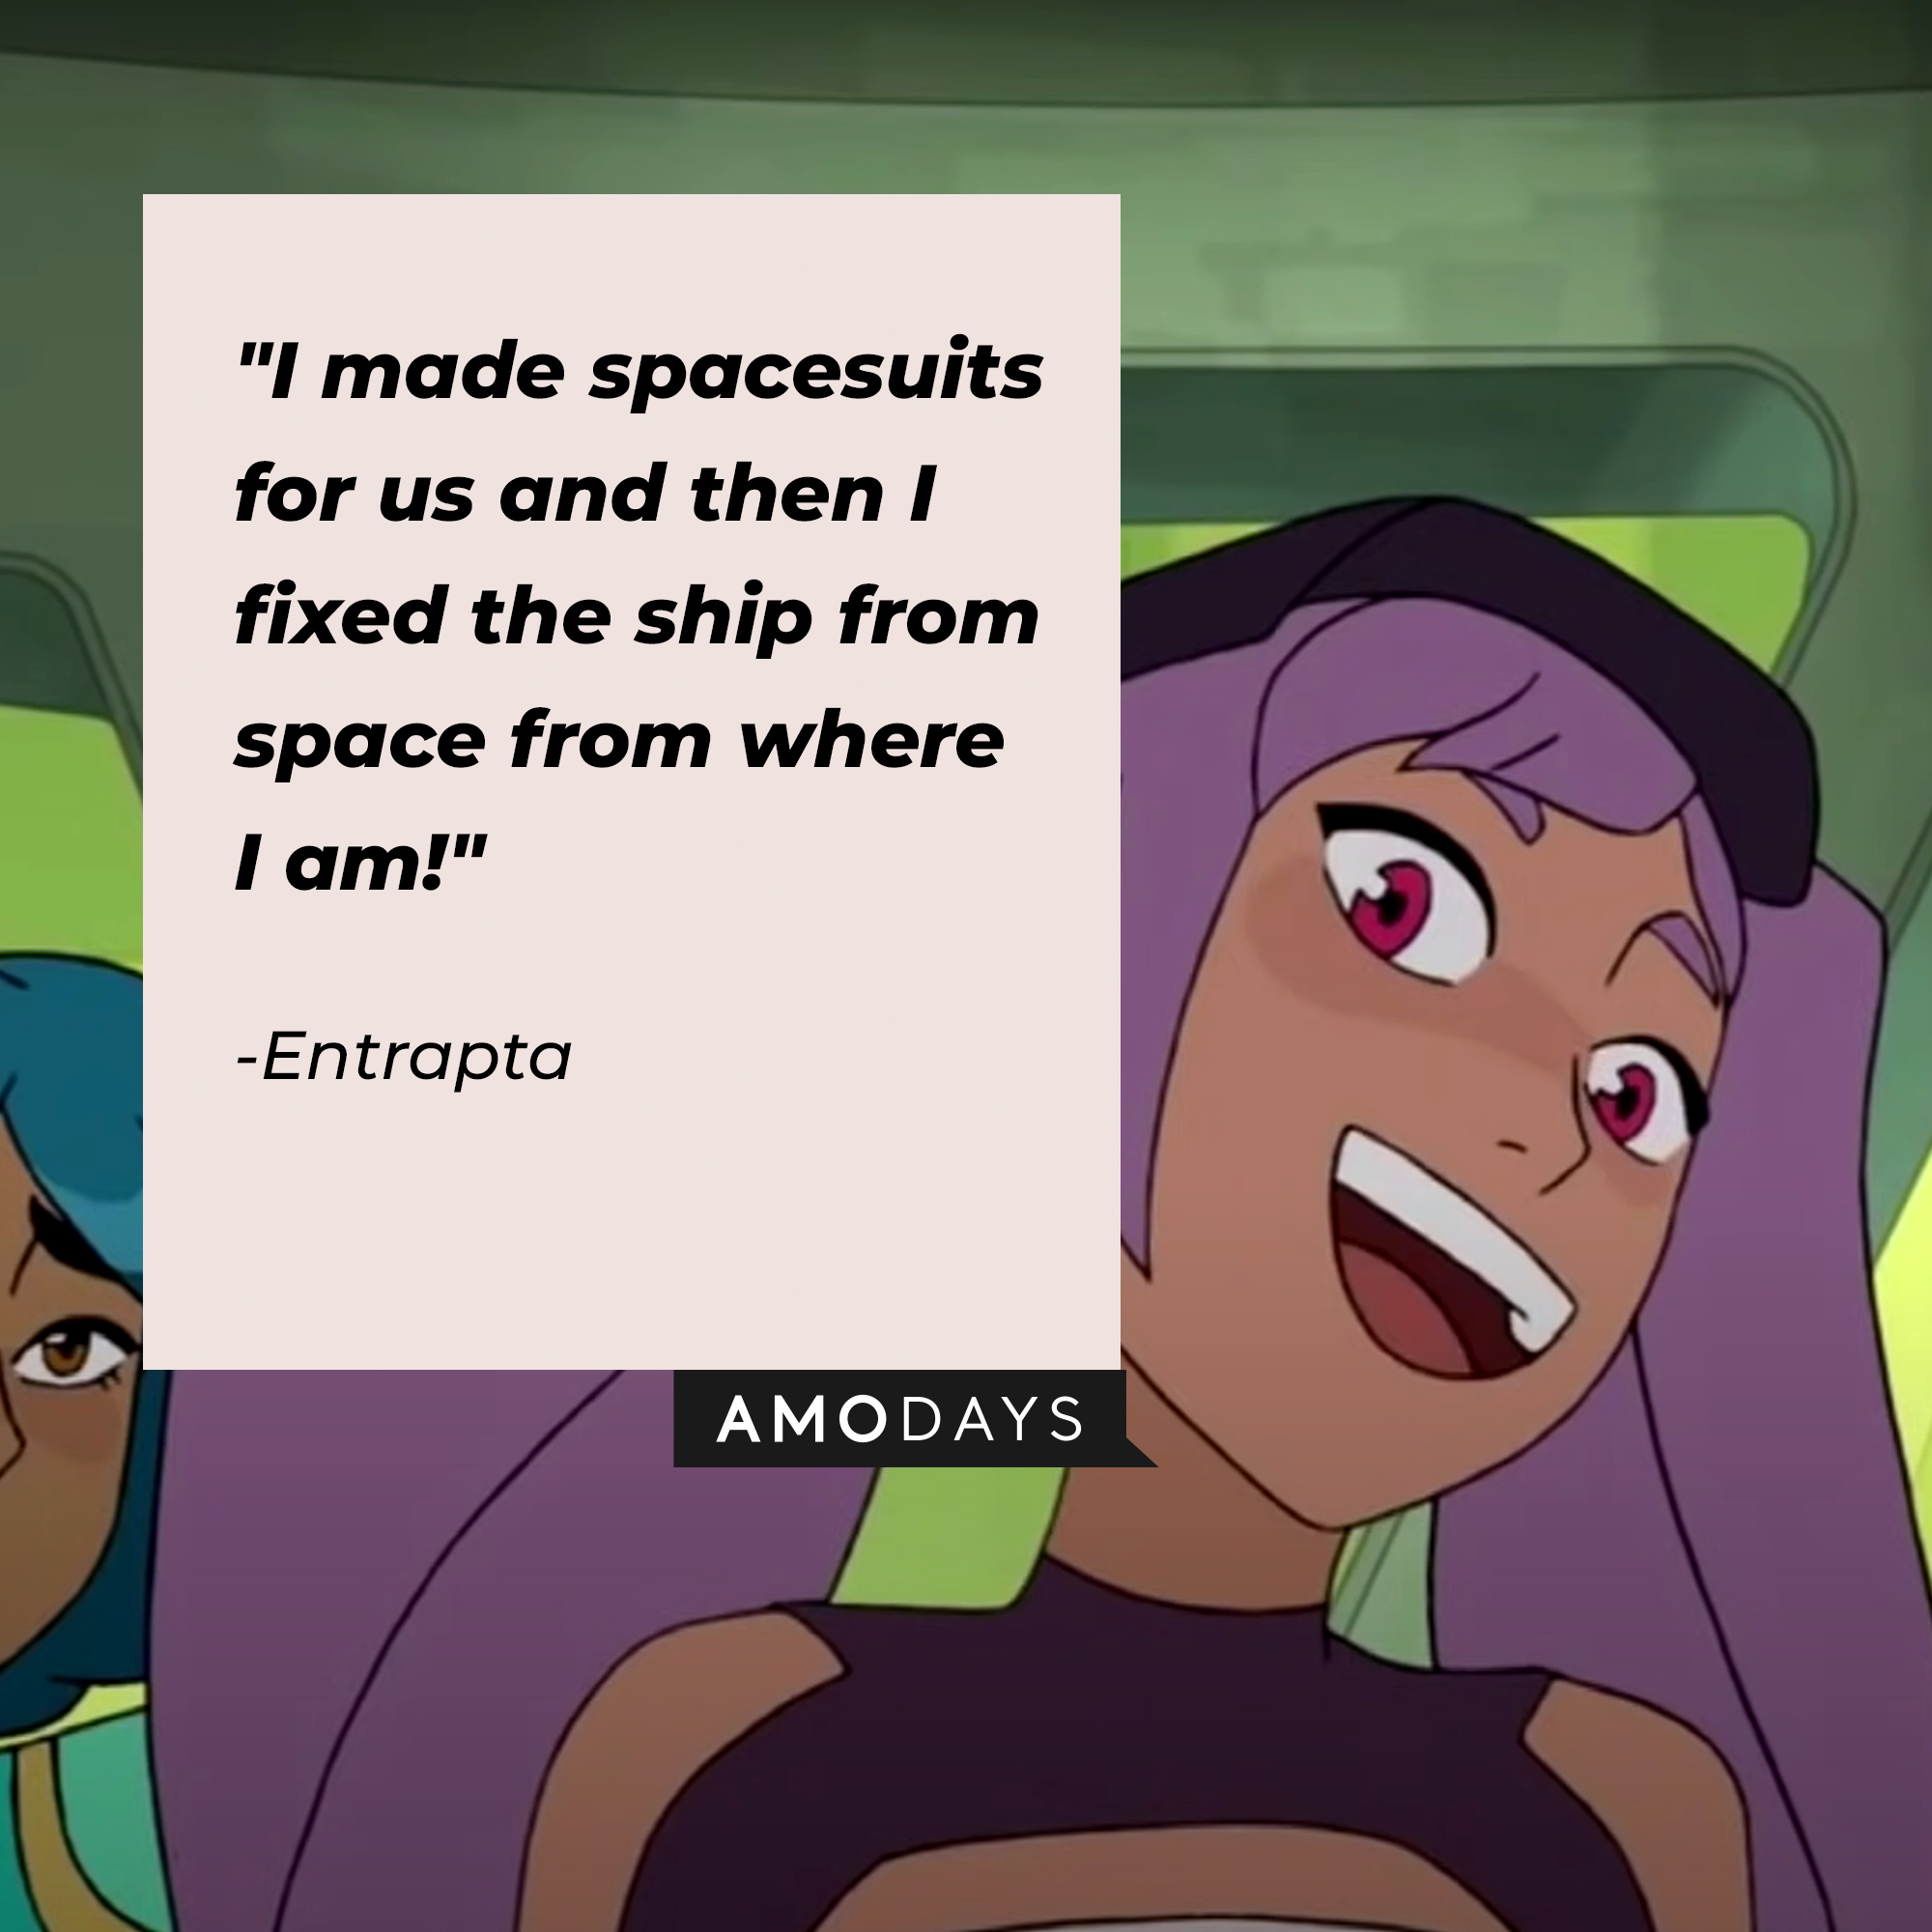 Entrapta's quote: "I made spacesuits for us and then I fixed the ship from space from where I am!" | Source: youtube.com/netflixafterschool